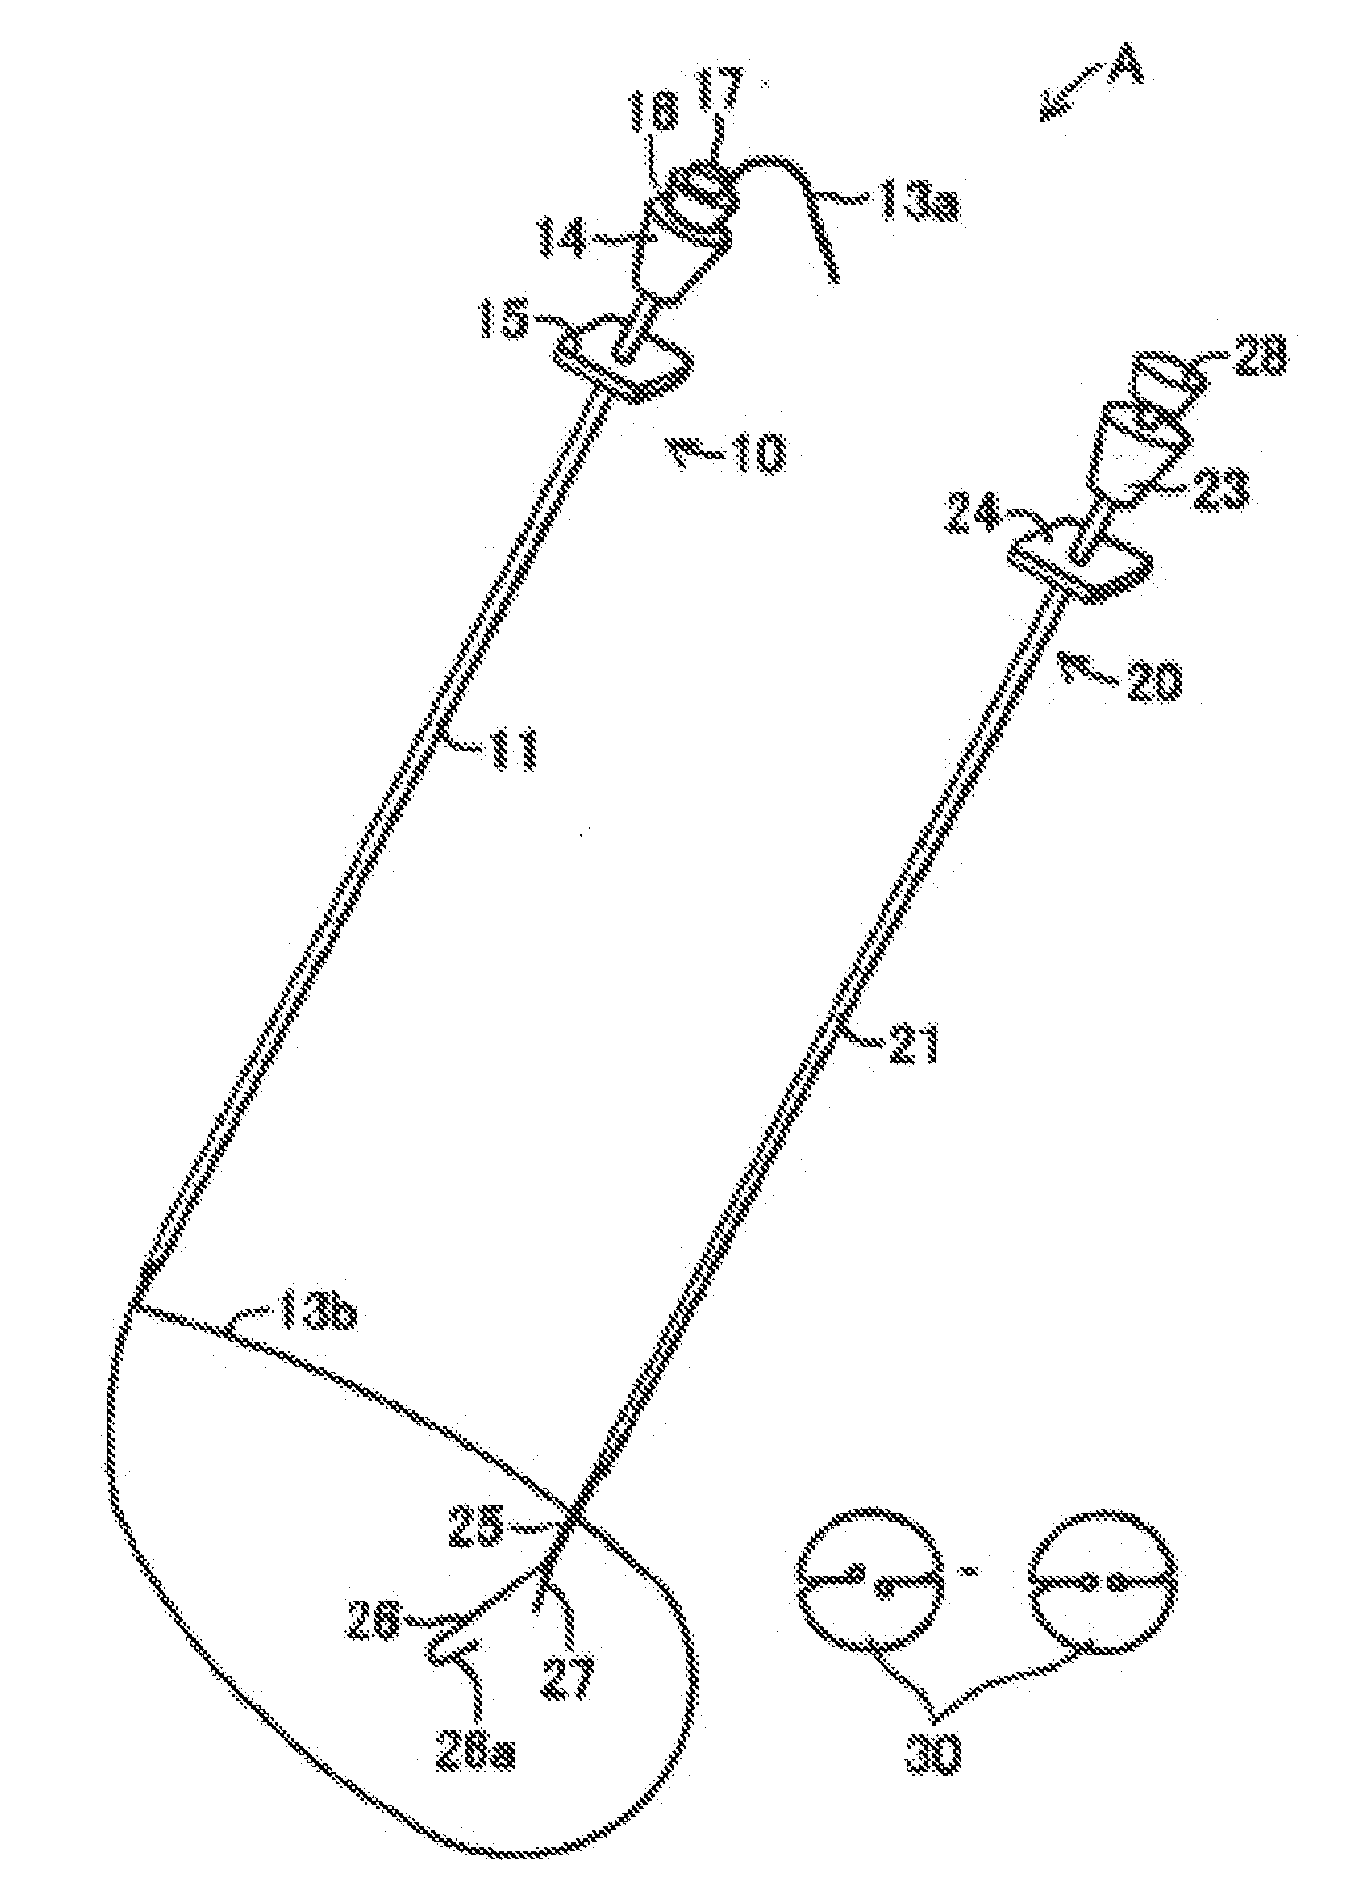 Medical suturing tool with multiple puncture needles